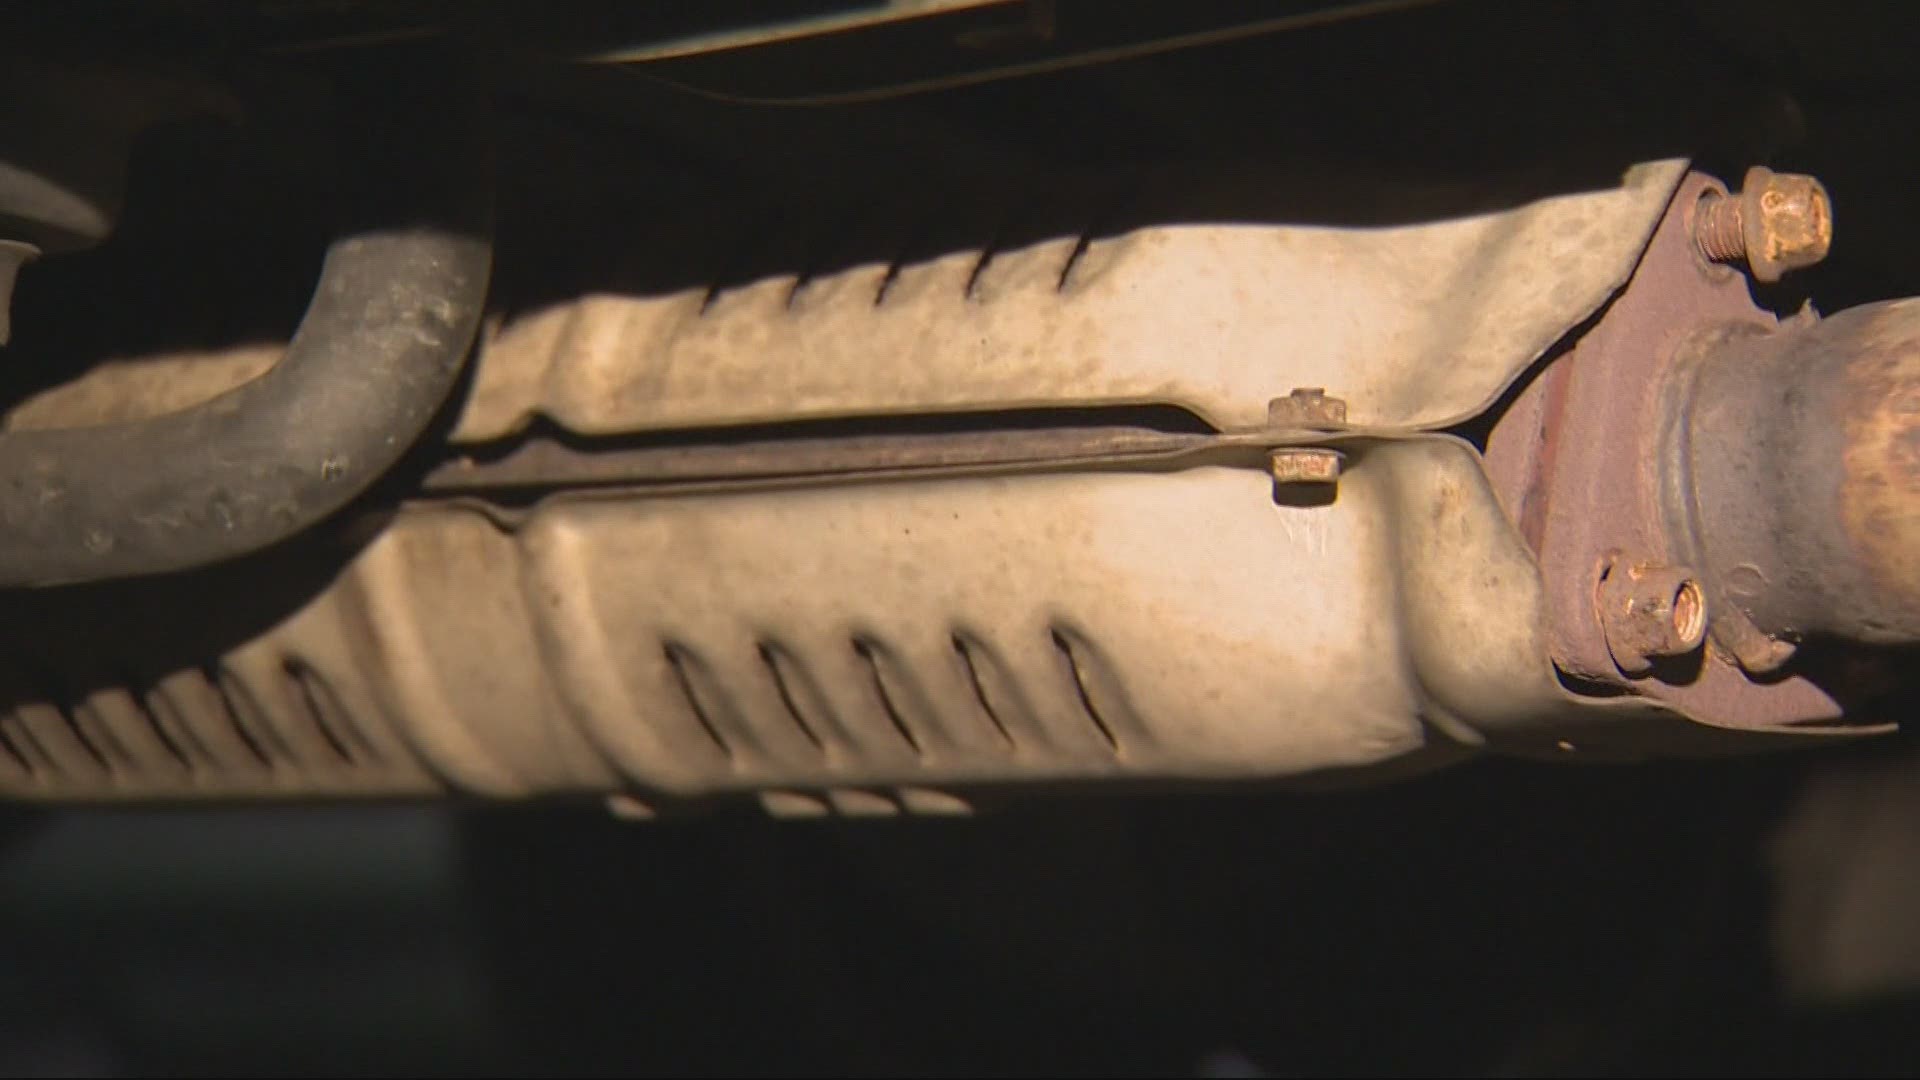 Catalytic converter theft continues to rise in Portland and all over the country. Senate Bill 803 aims to stop thieves from stealing the car part.